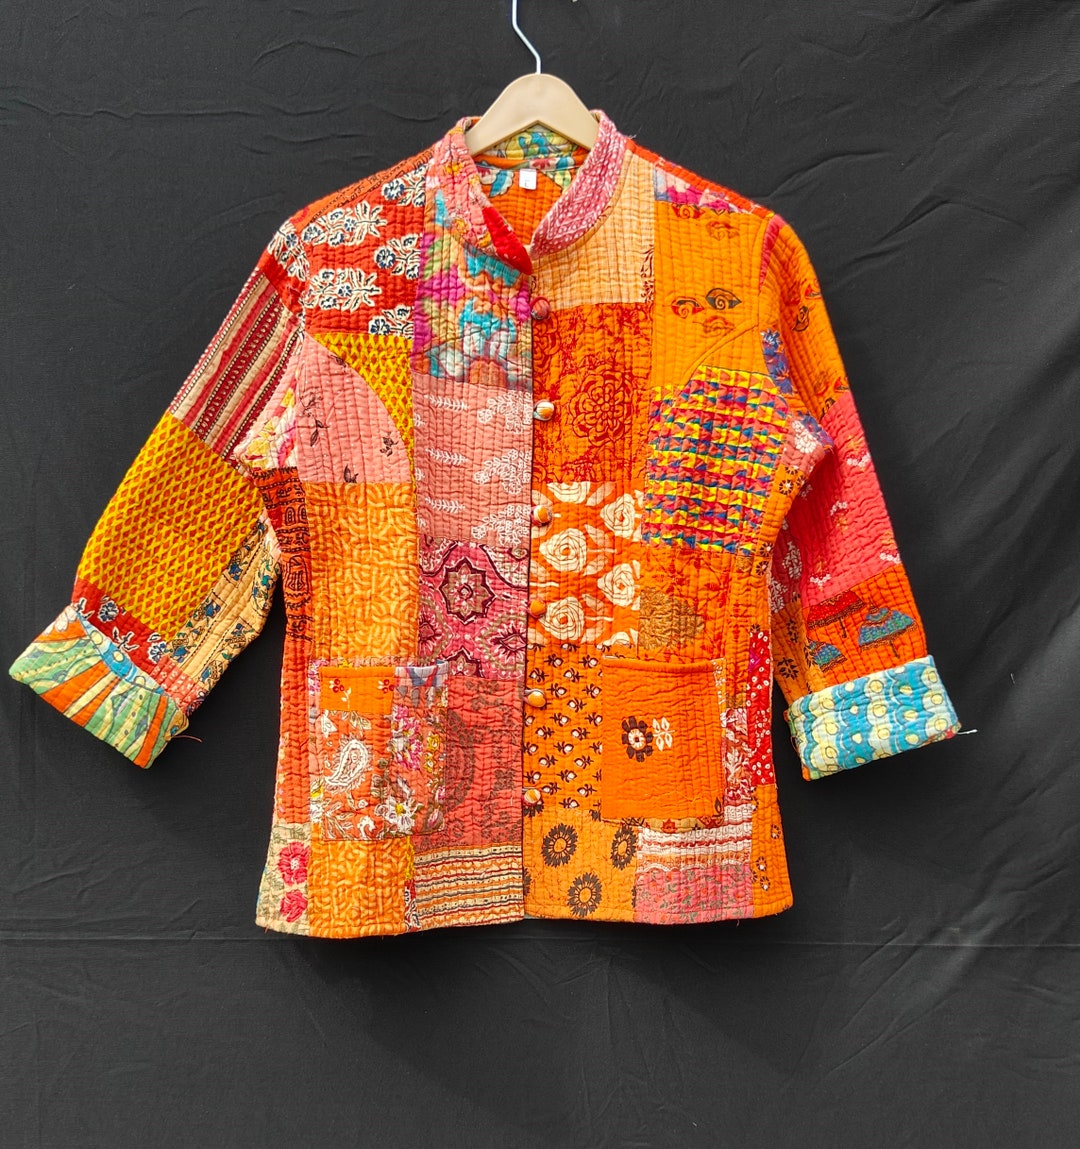 Cotton Quilted Jacket Women Wear Handmade Vintage Quilted Jacket ...